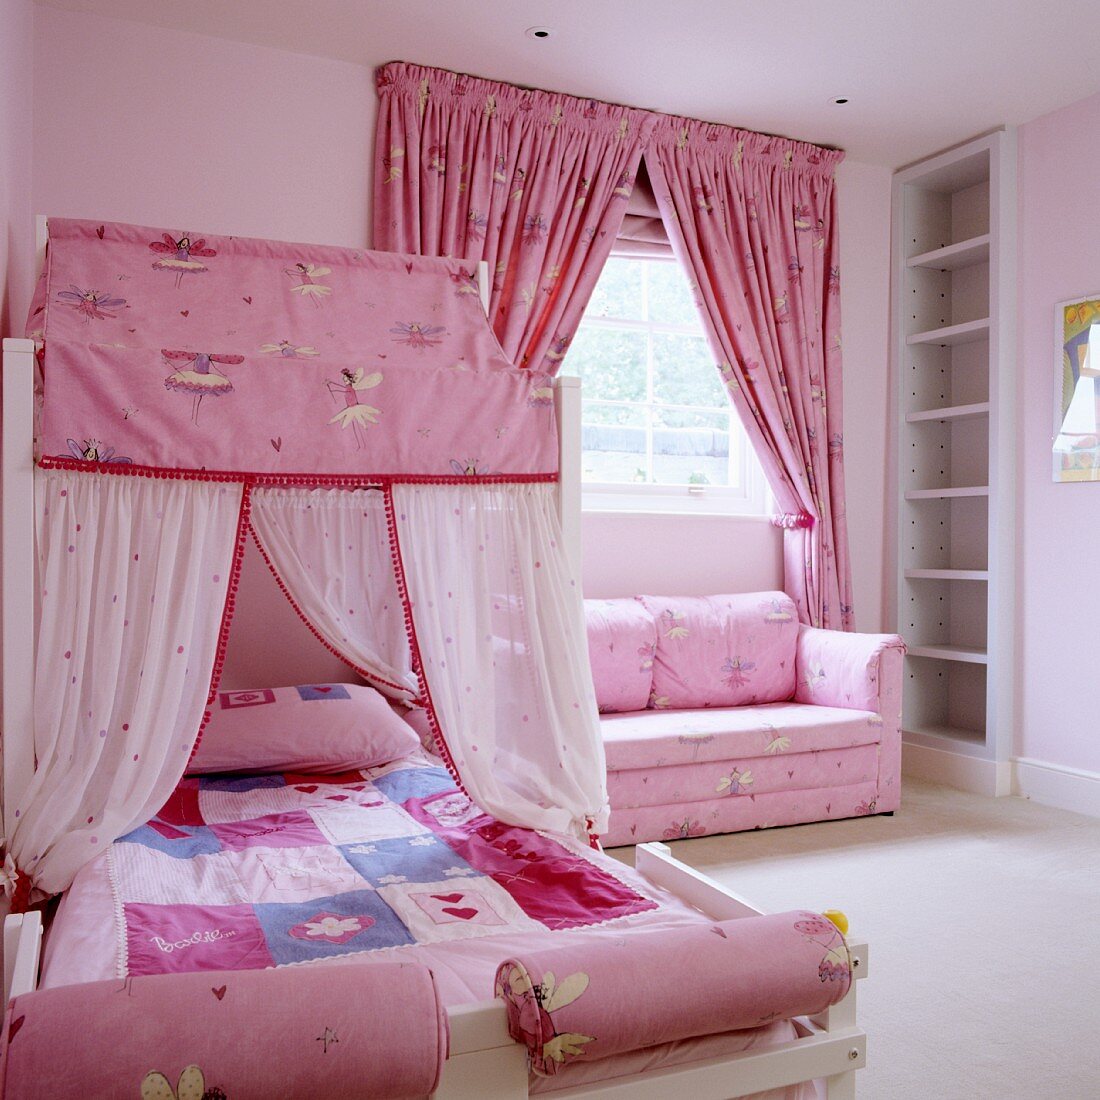 Little girl's bedroom in pink with fairy-tale elements